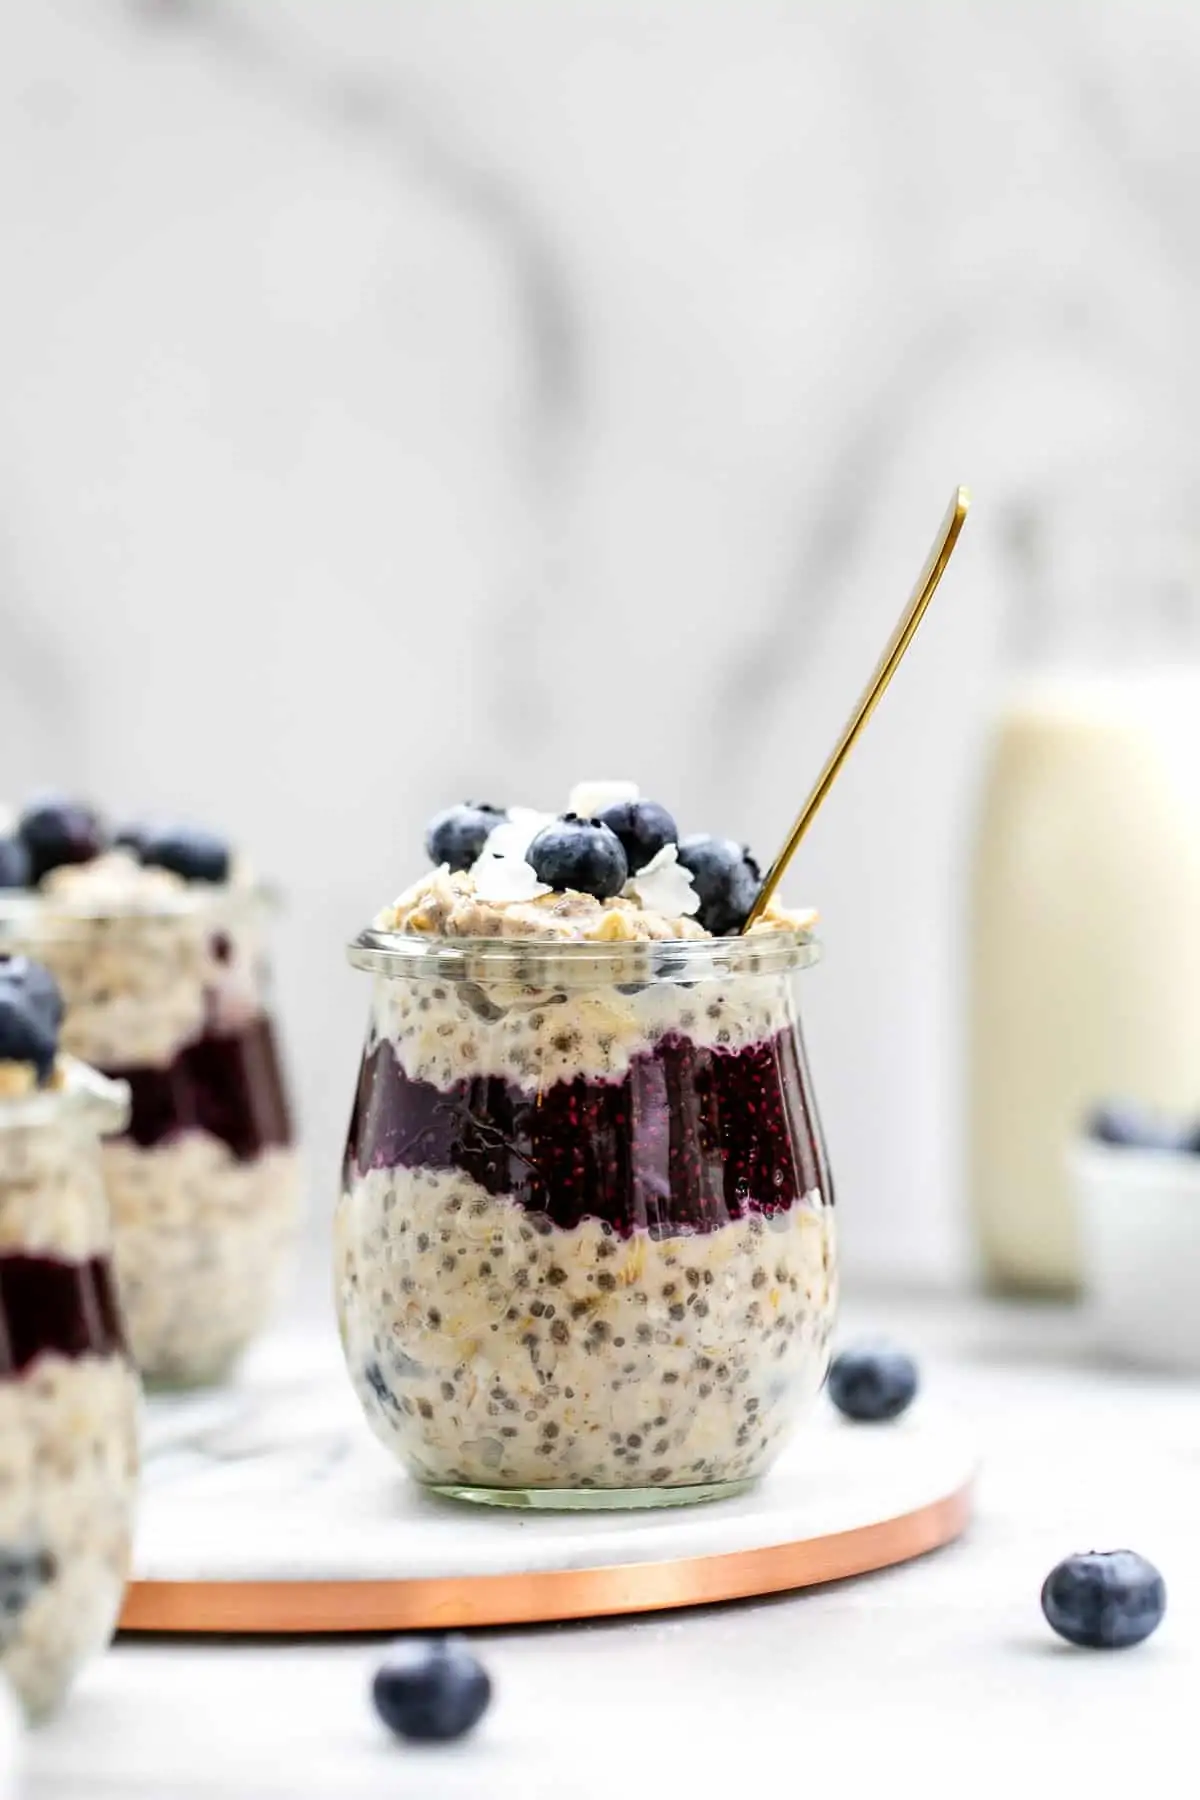 Blueberry overnight oats in a small glass jar with chia jam in the middle.